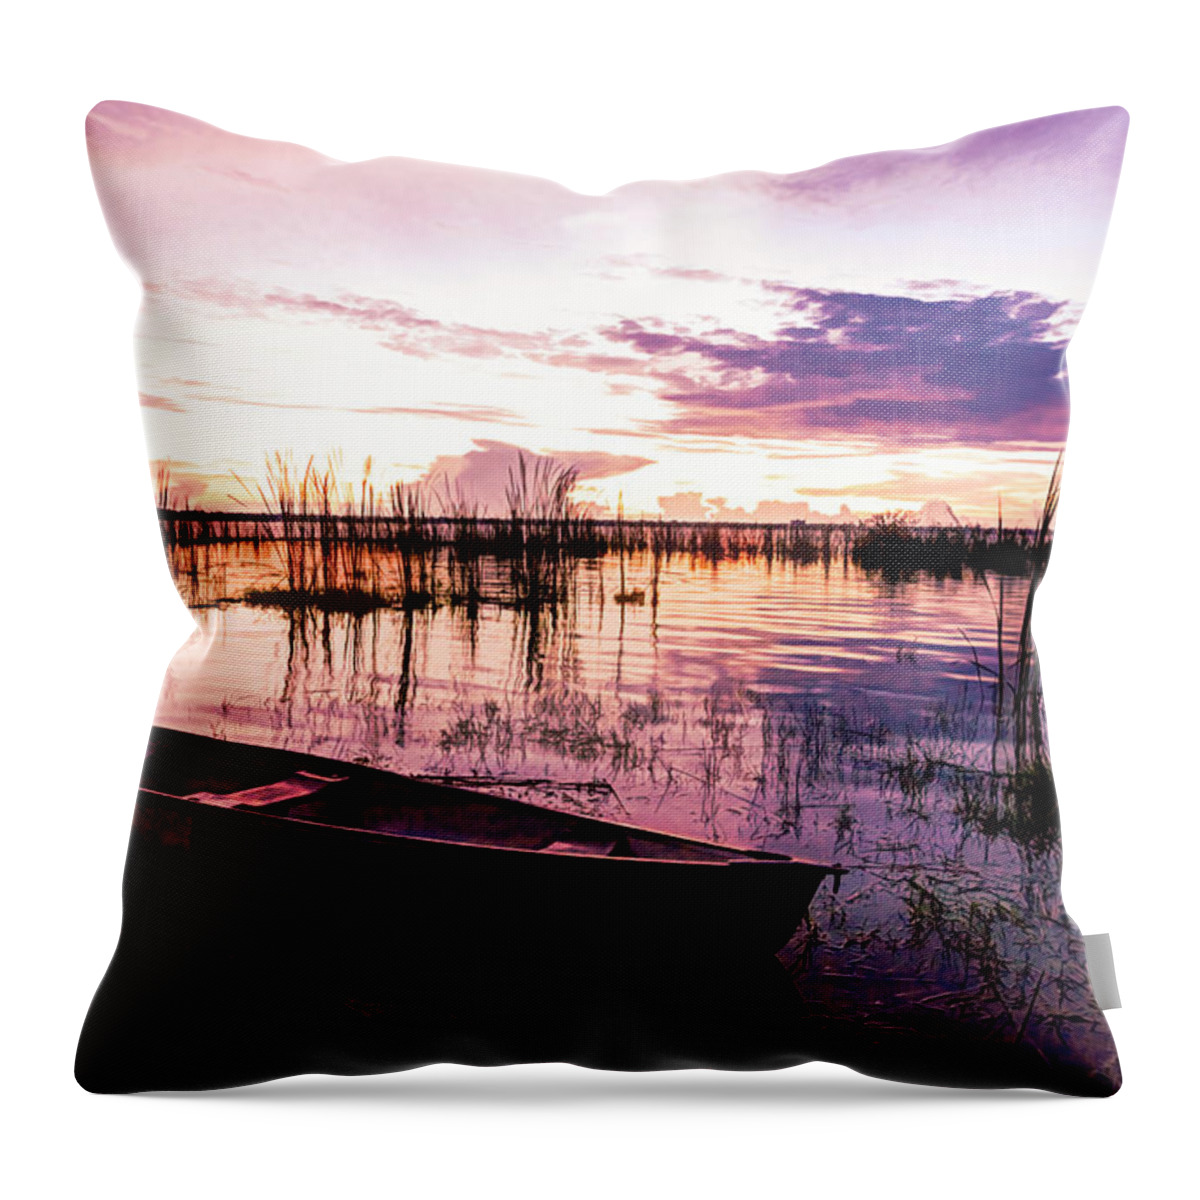 Boats Throw Pillow featuring the photograph Dreamy Nightfall at the Lake by Debra and Dave Vanderlaan